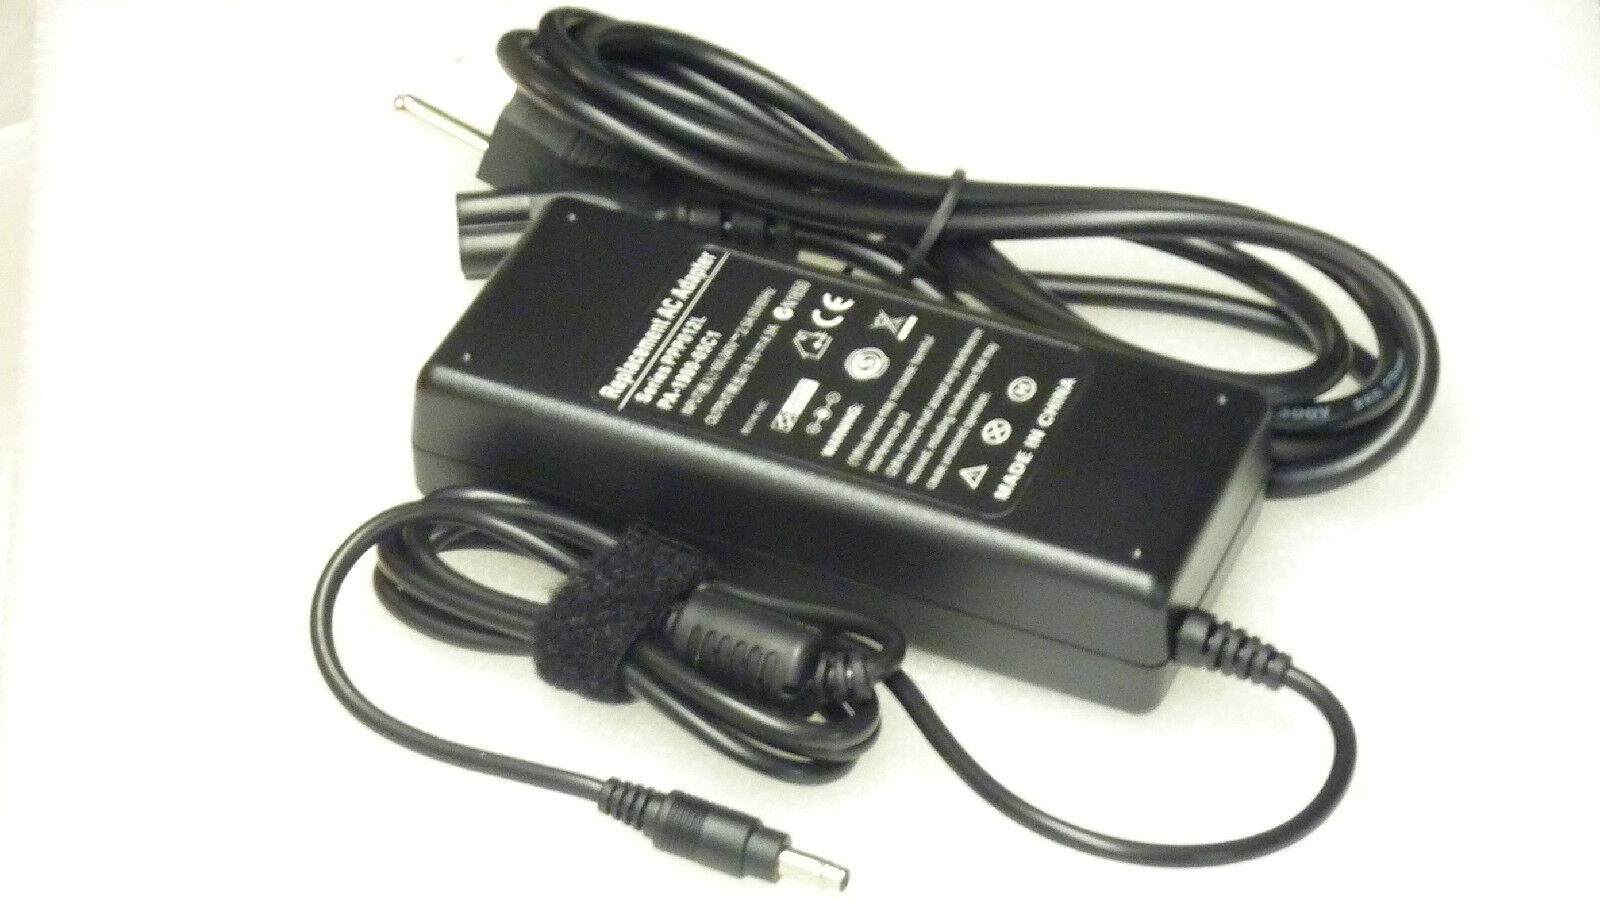 New AC ADAPTER Charger Power Cord Supply for HP 394224-001 393954-001 380467-004